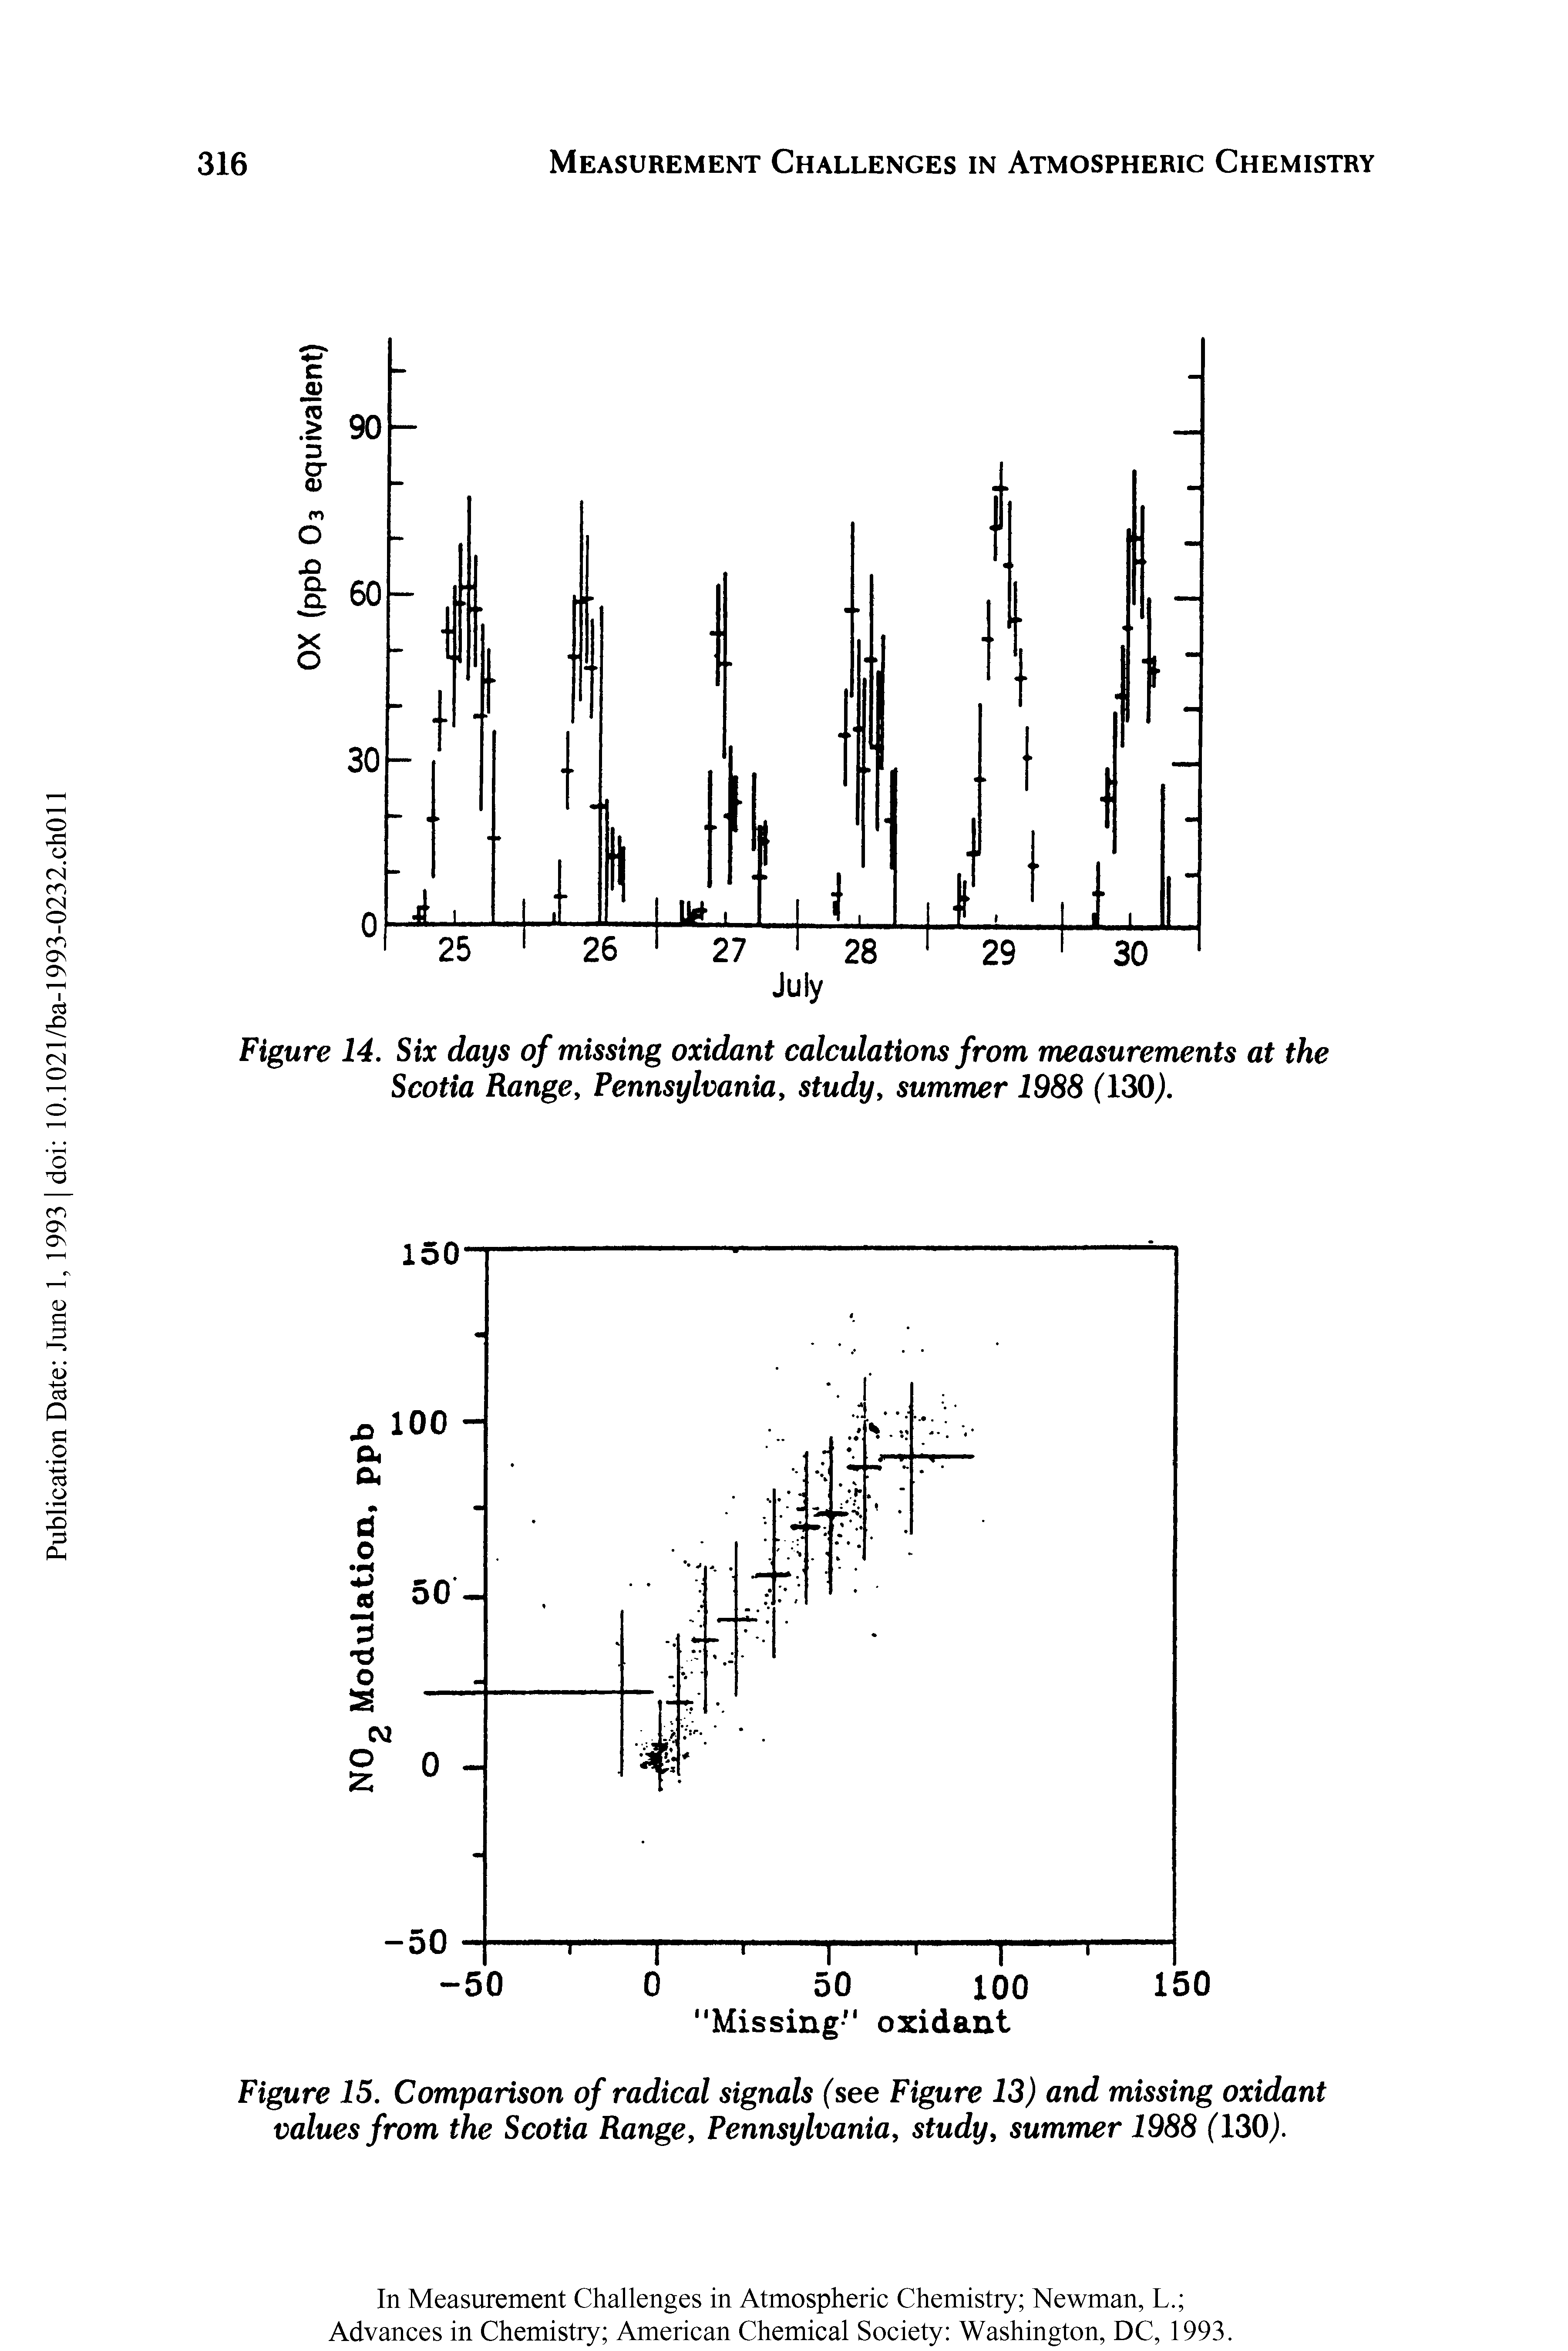 Figure 15. Comparison of radical signals (see Figure 13) and missing oxidant values from the Scotia Range, Pennsylvania, study, summer 1988 (130).